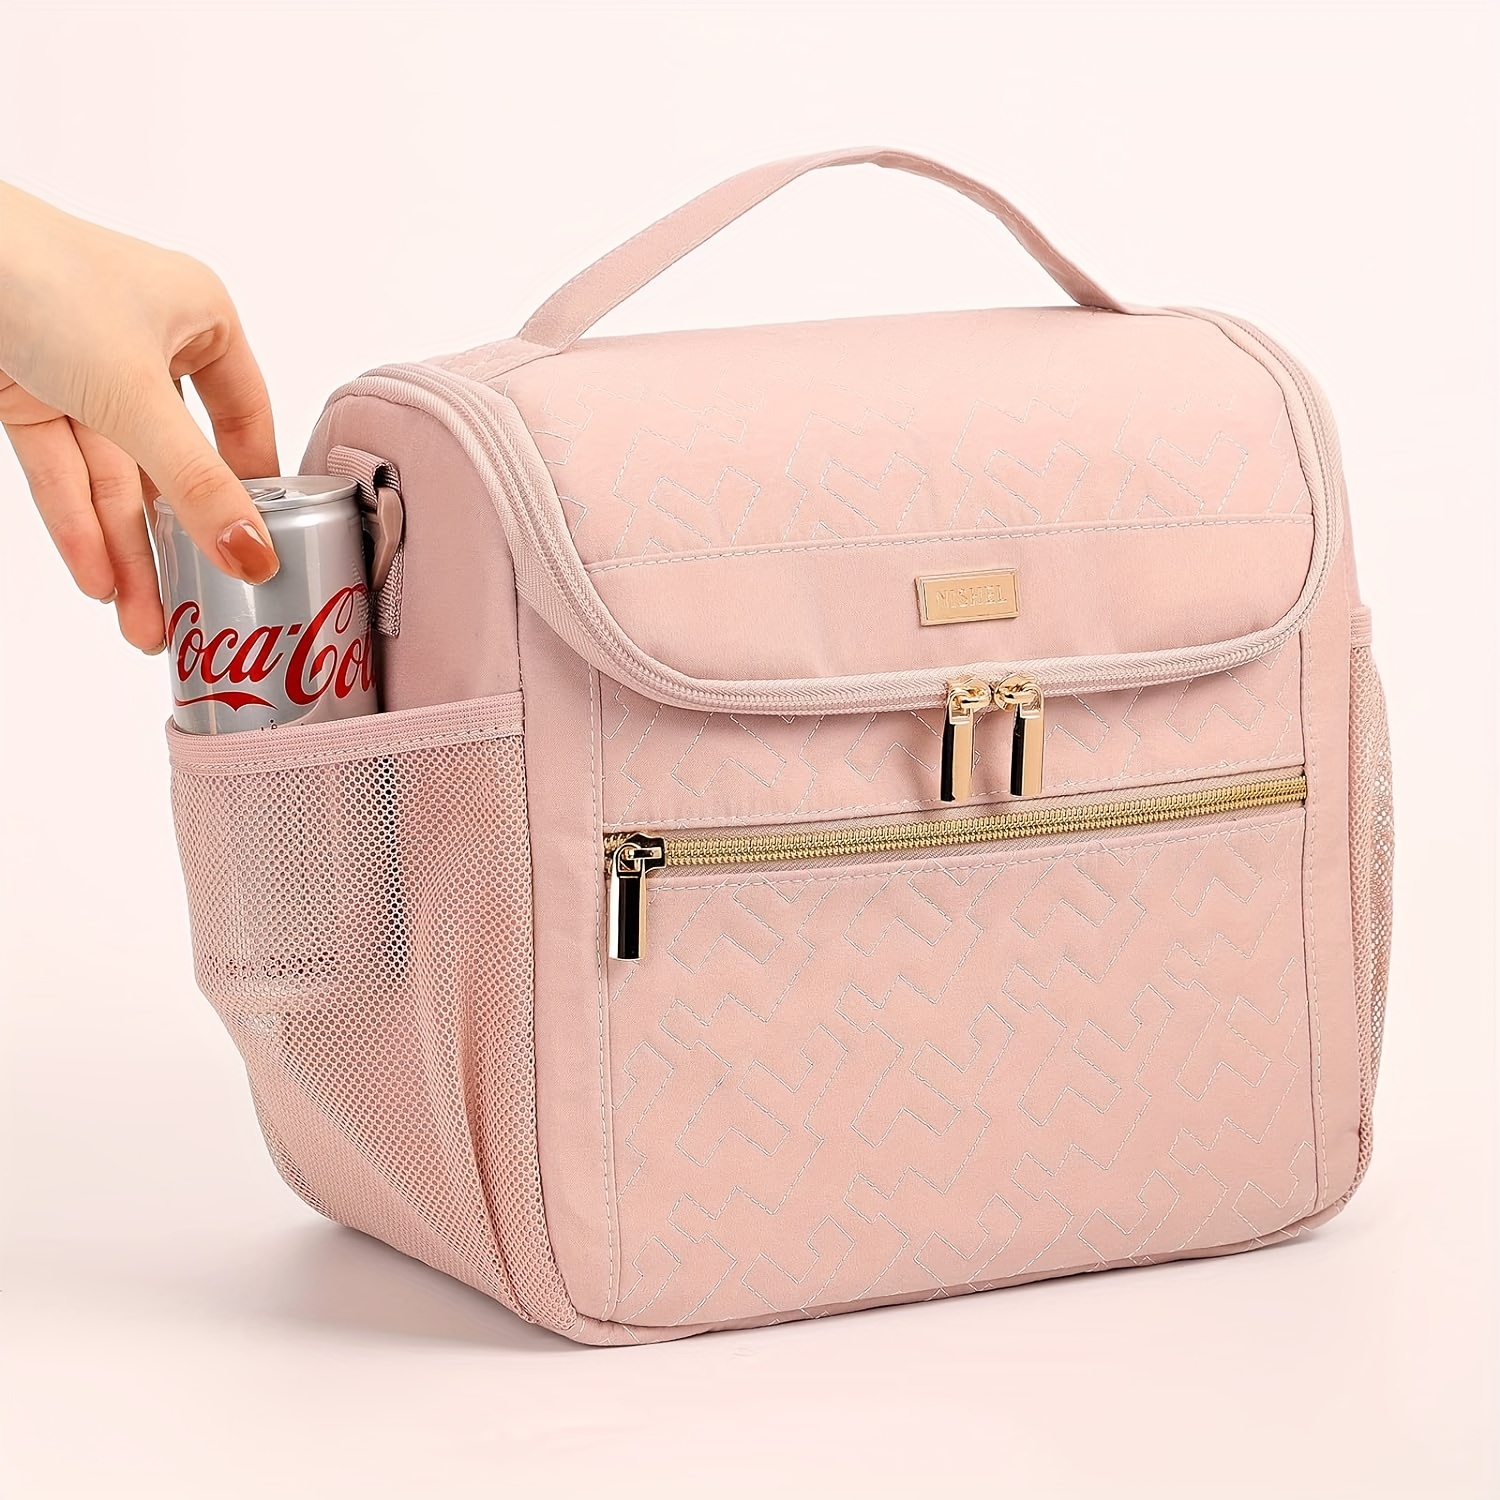 

Chic Pink Insulated Lunch Bag For Women - Portable, Leakproof Cooler With Shoulder Strap, Reusable Polyester Bento Box Carrier For Work & Picnic Lunch Bag Insulated Lunch Bags For Women For Work